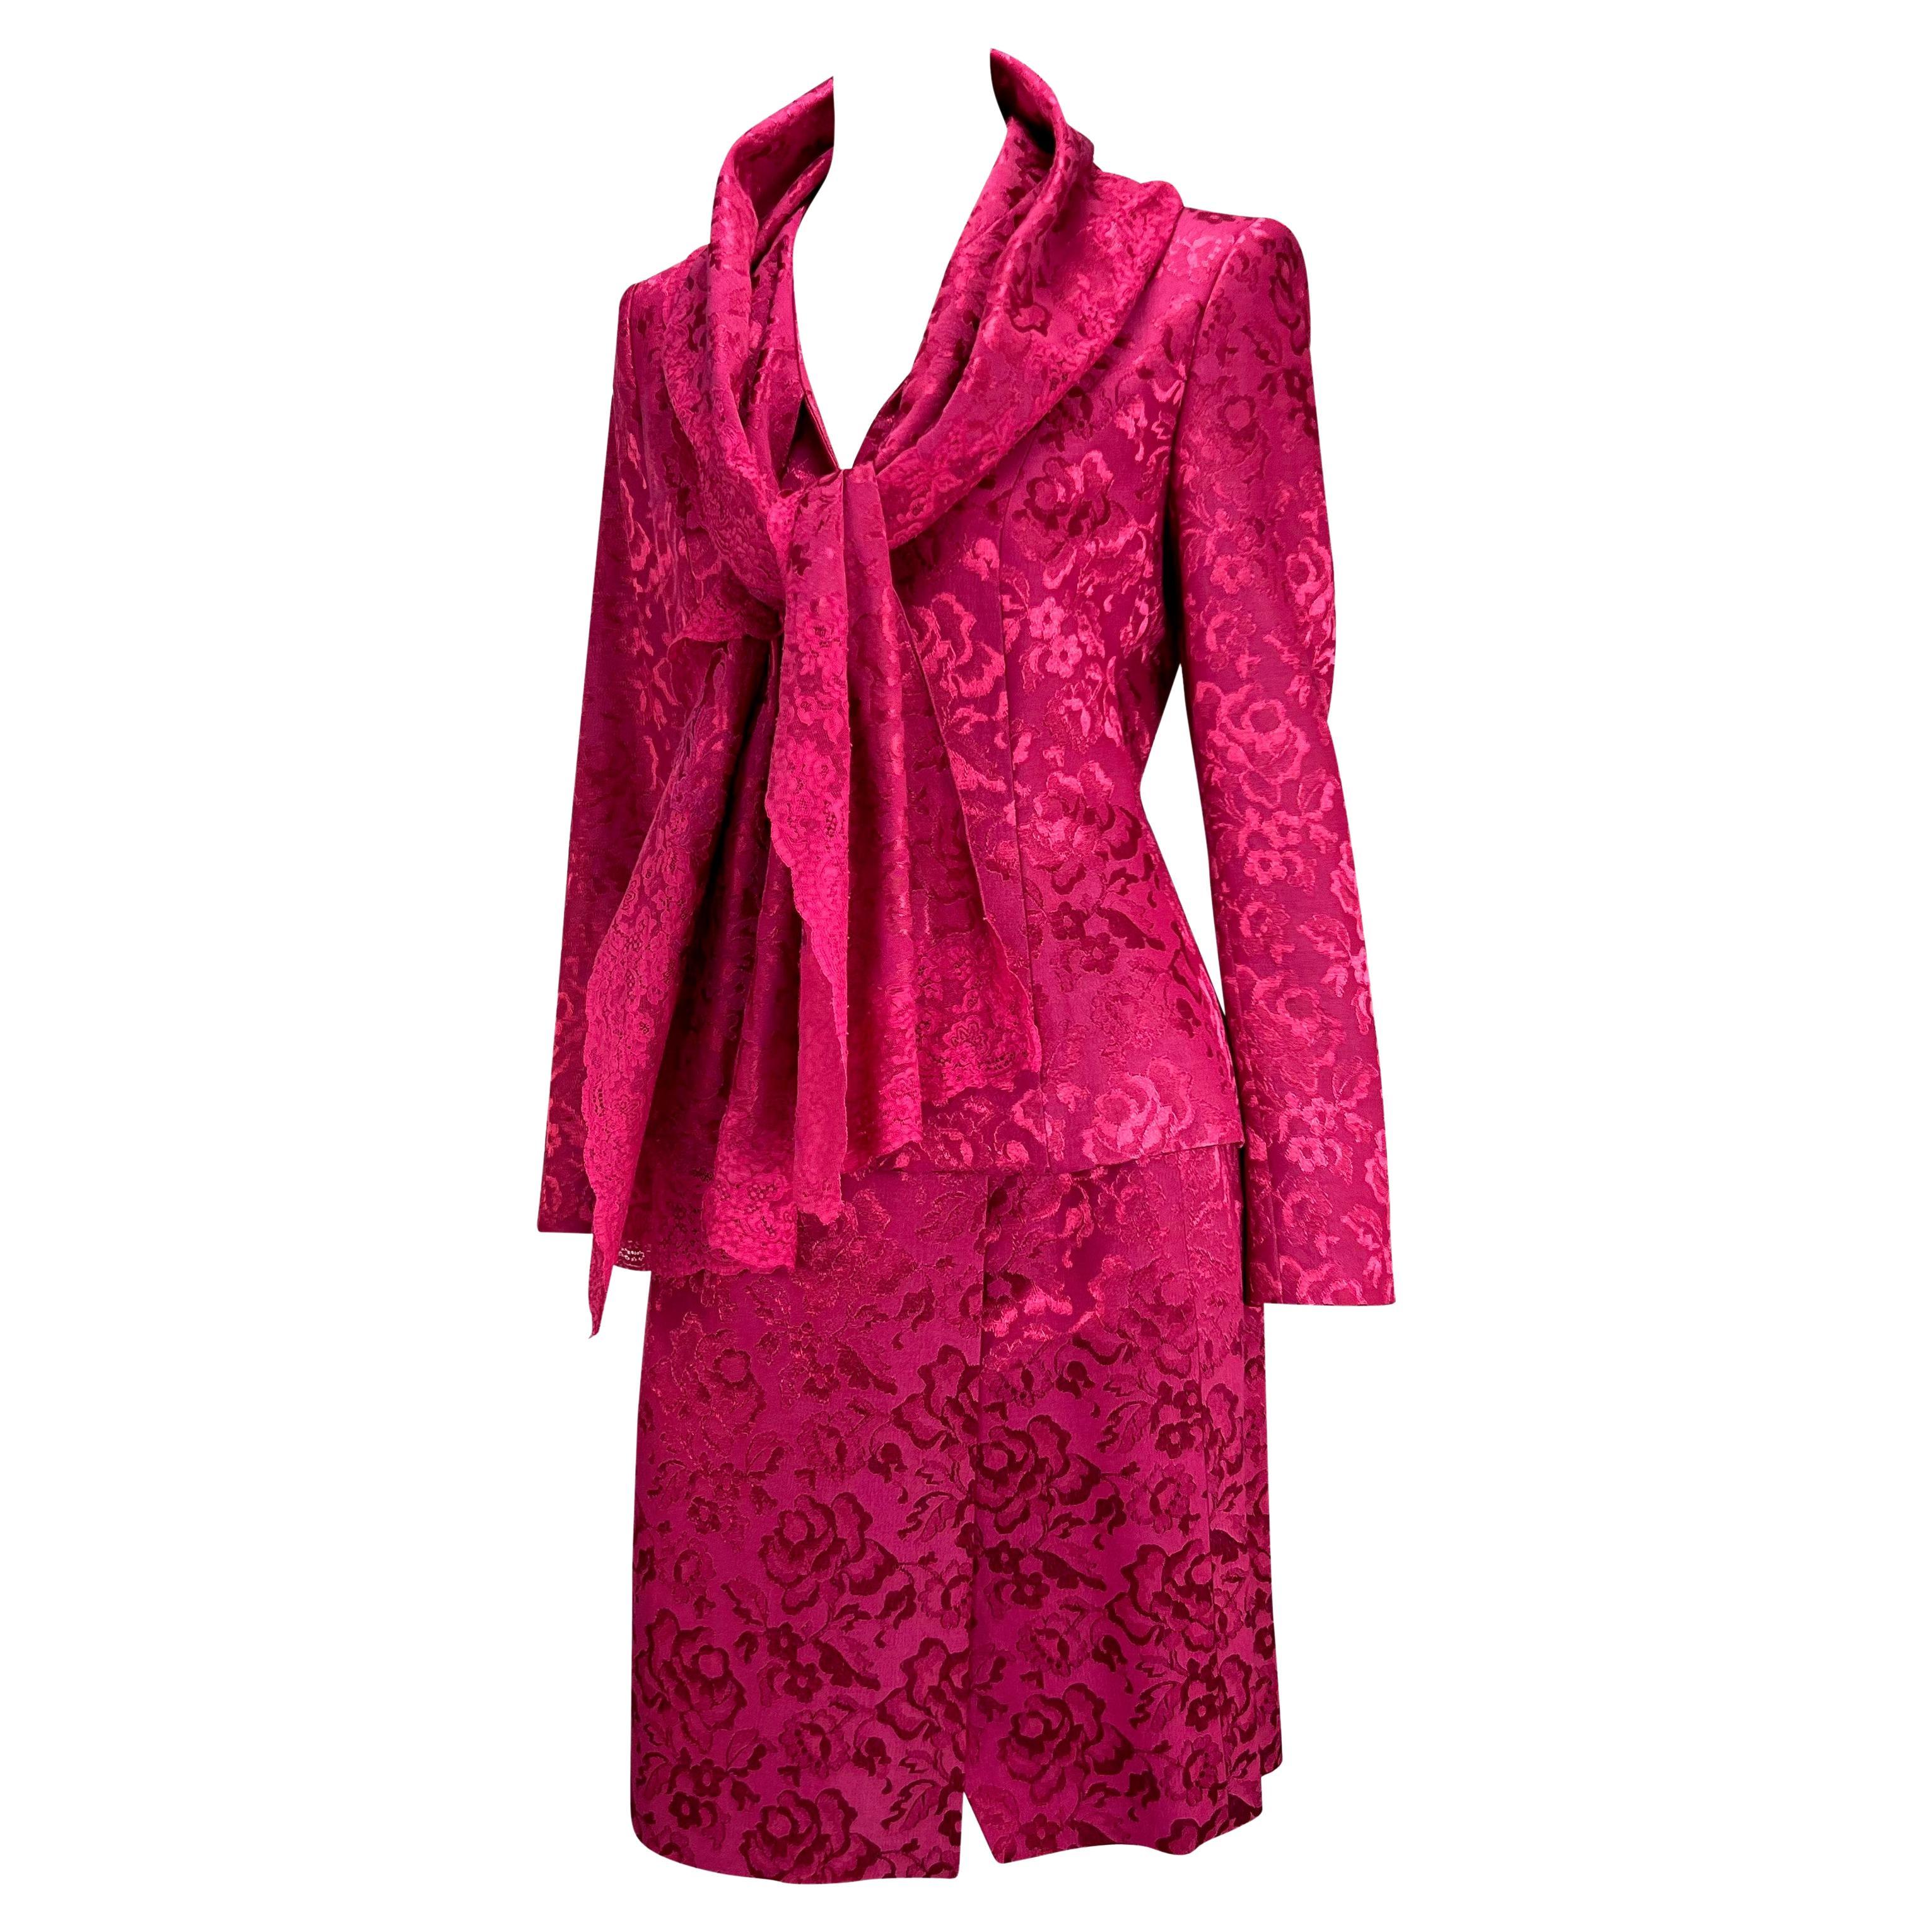 F/W 1998 Christian Dior by John Galliano Pink Floral Brocade Lace Skirt Suit In Excellent Condition For Sale In West Hollywood, CA